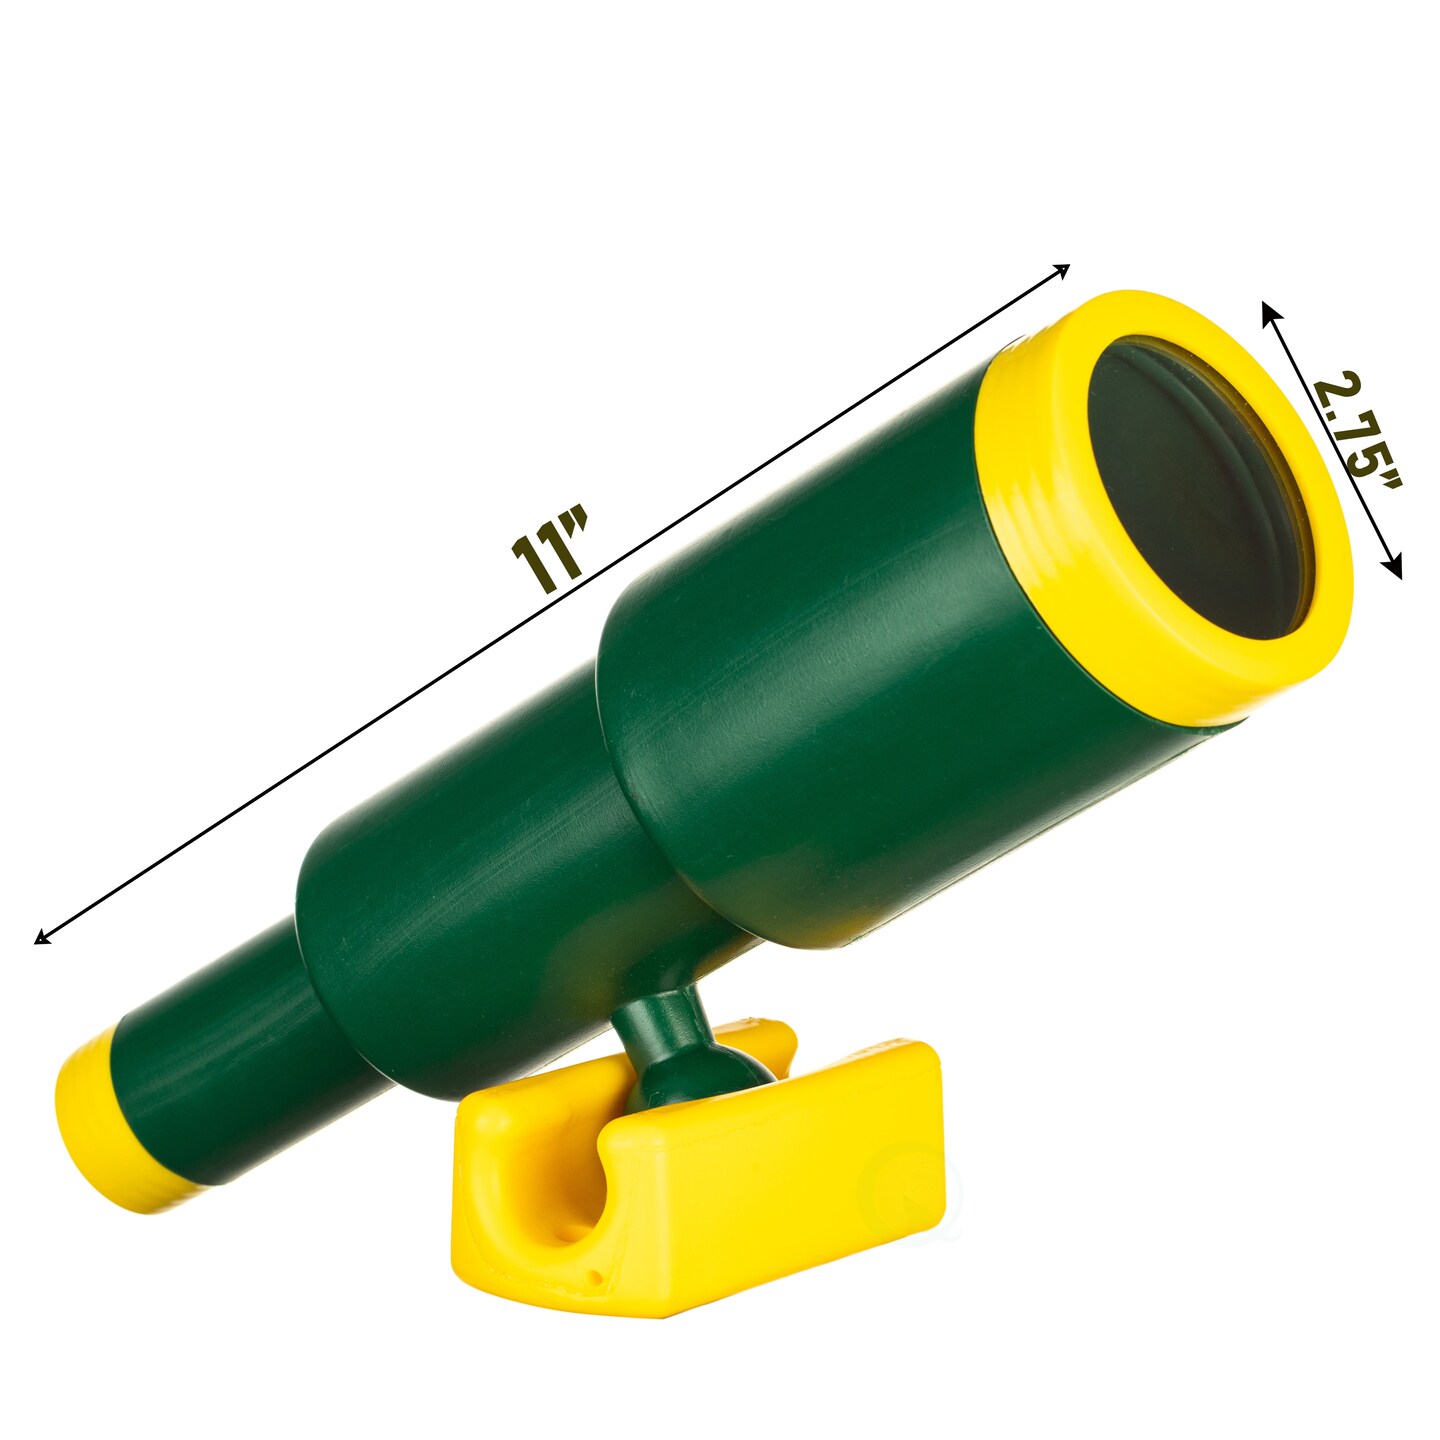 Green and Yellow Plastic Outdoor Gym Playground Pirate Ship Telescope, Treehouse Toy Accessories Binocular for Kids